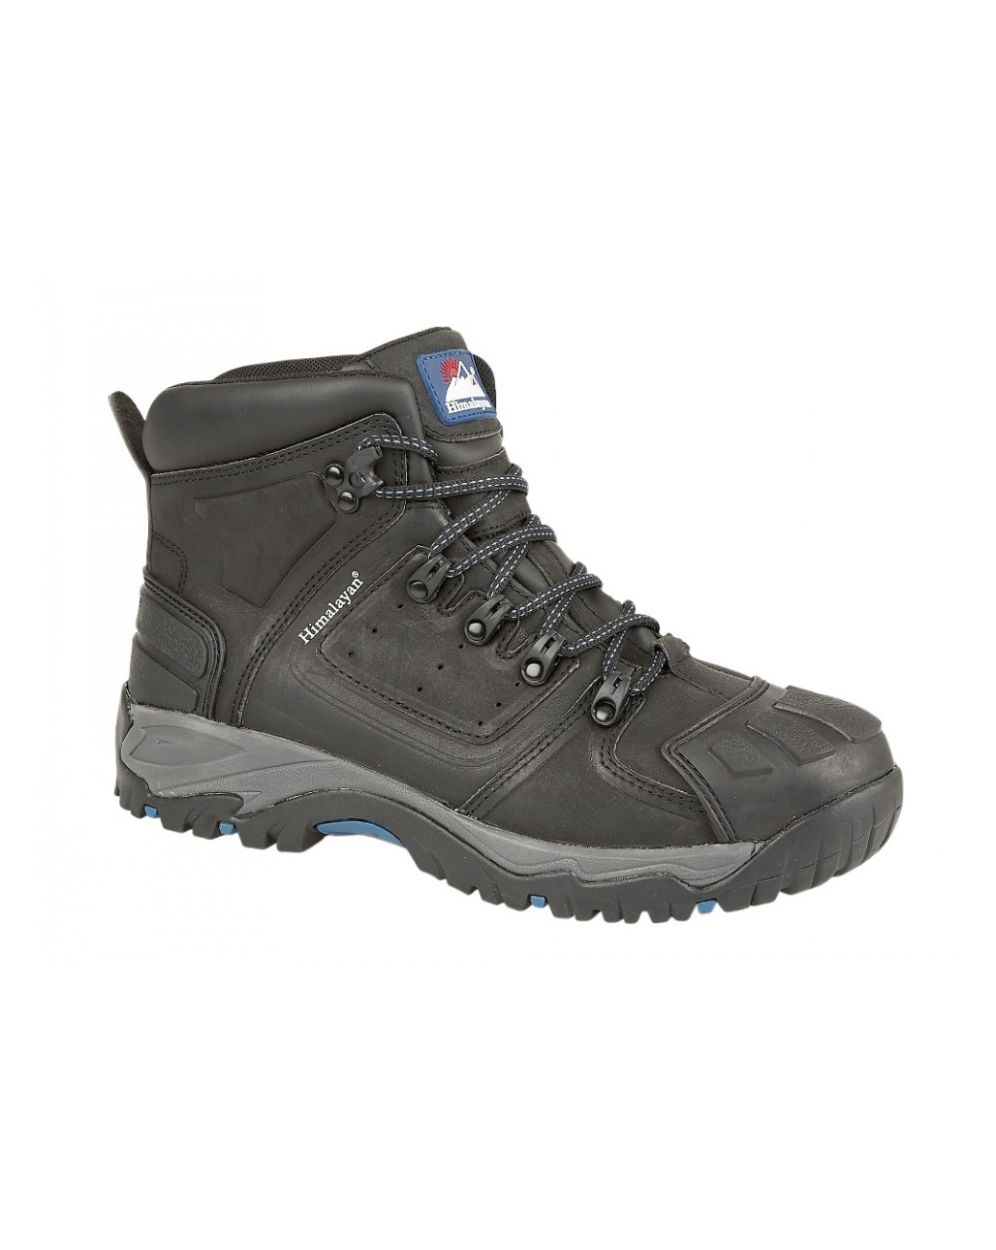 Himalayan 5206 Waterproof Safety Boot Scuff Cap - LA Safety Supplies